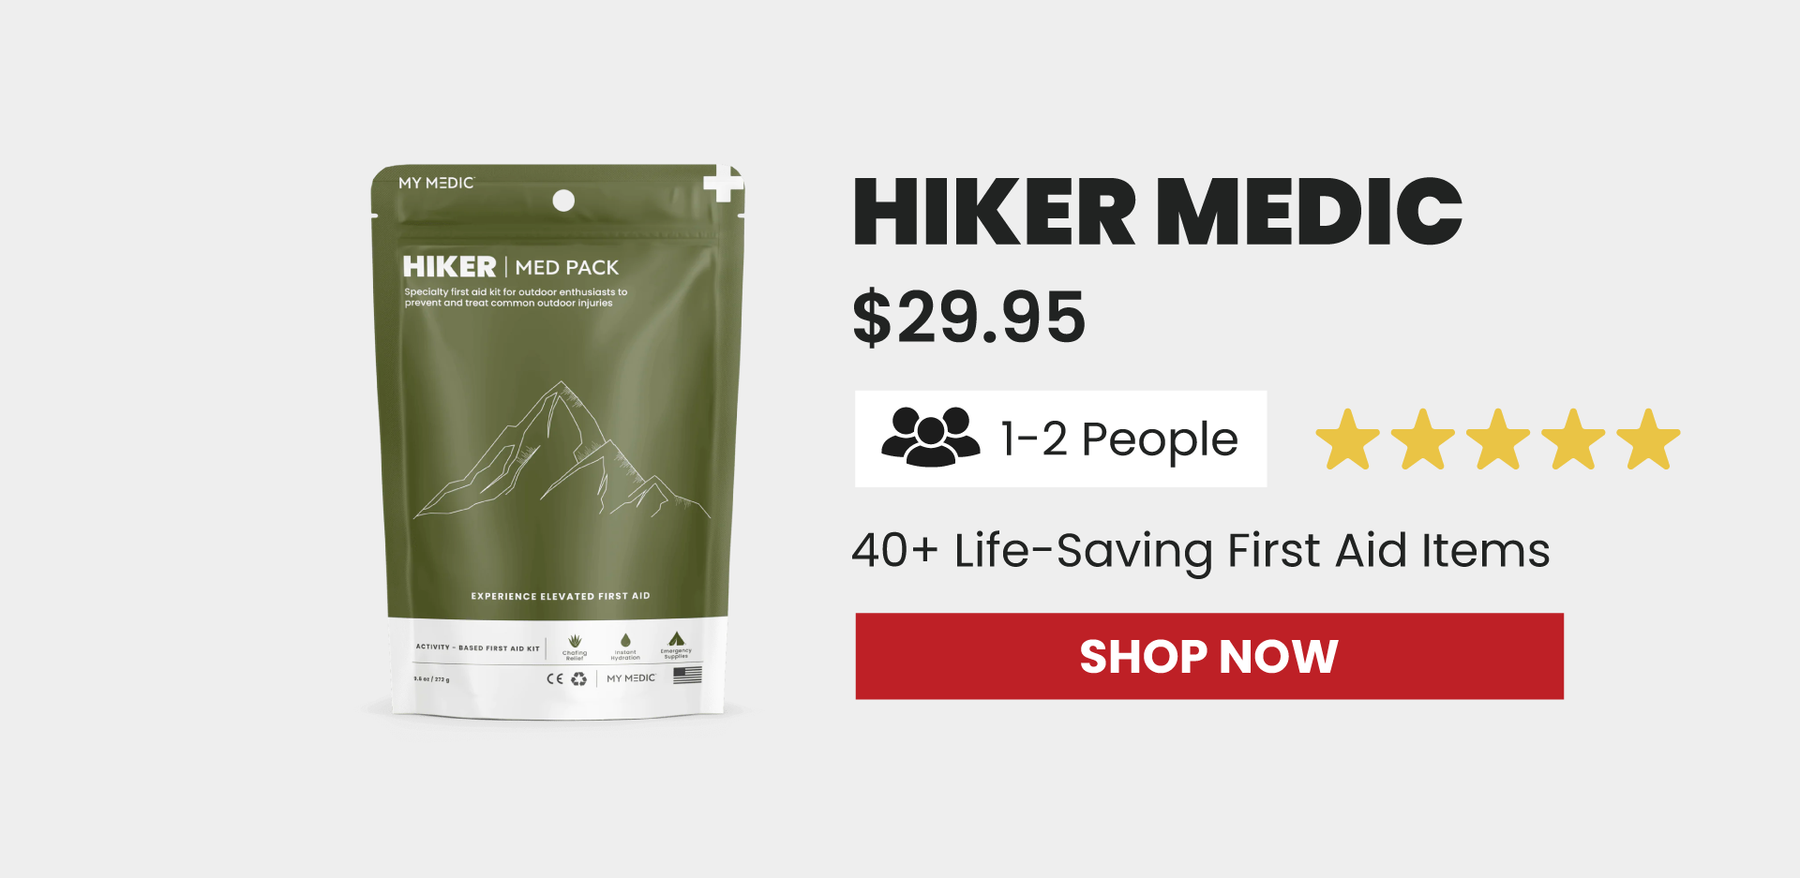 Hiker Medic, $29.95, 1-2 People, 40+ Life-Saving First Aid Items, Shop Now